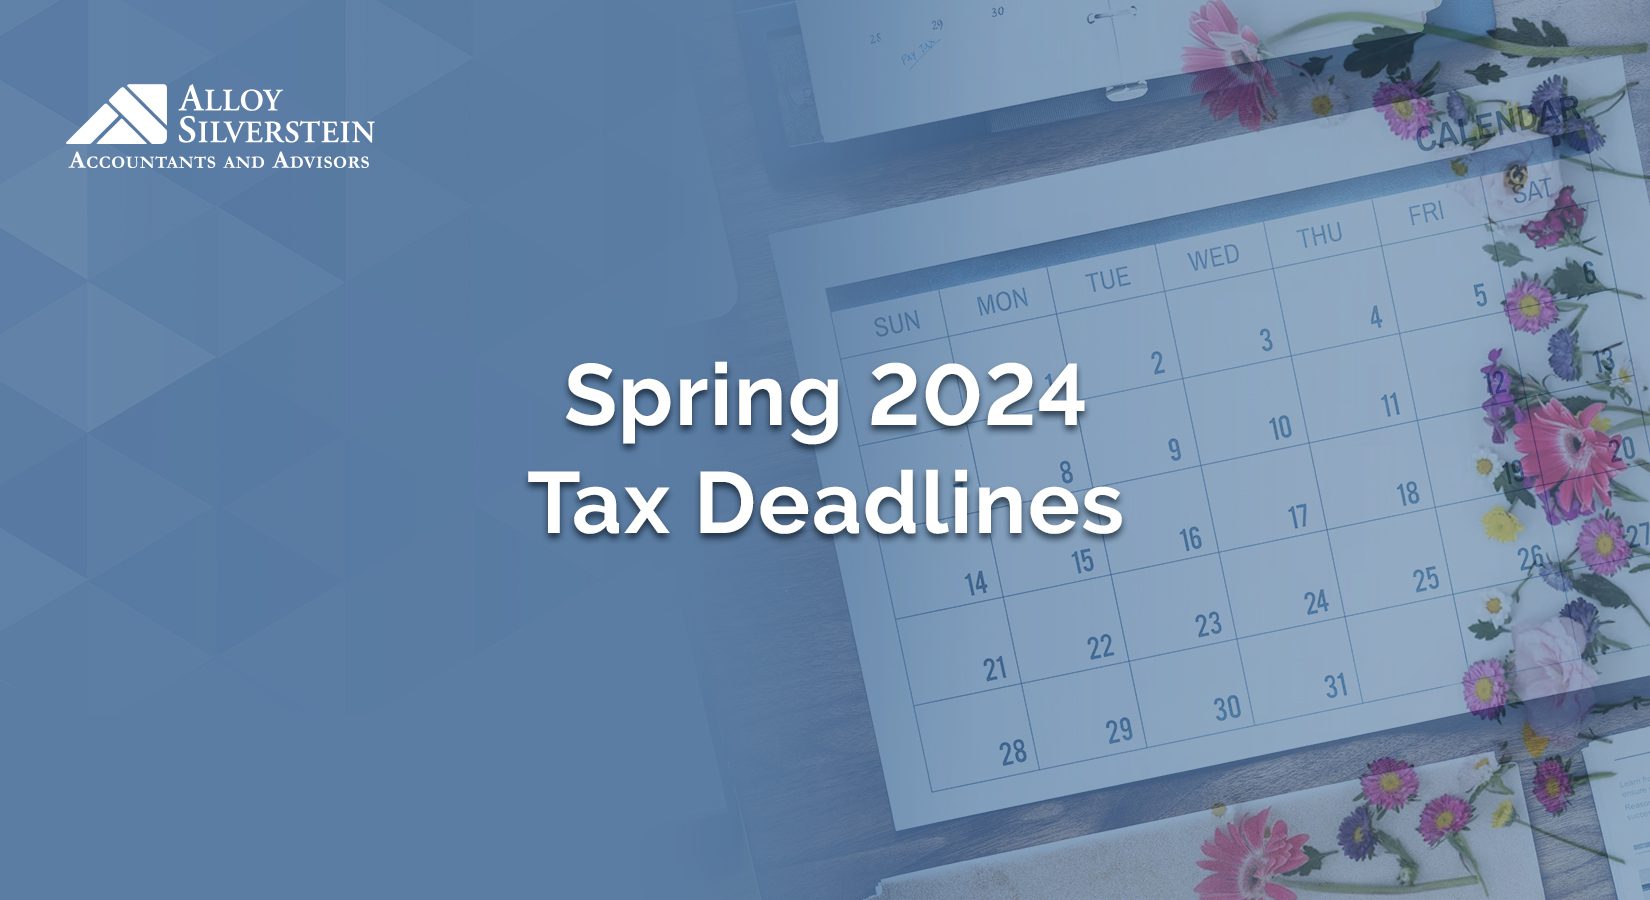 Spring 2024 Tax Deadlines and IRS News Alloy Silverstein